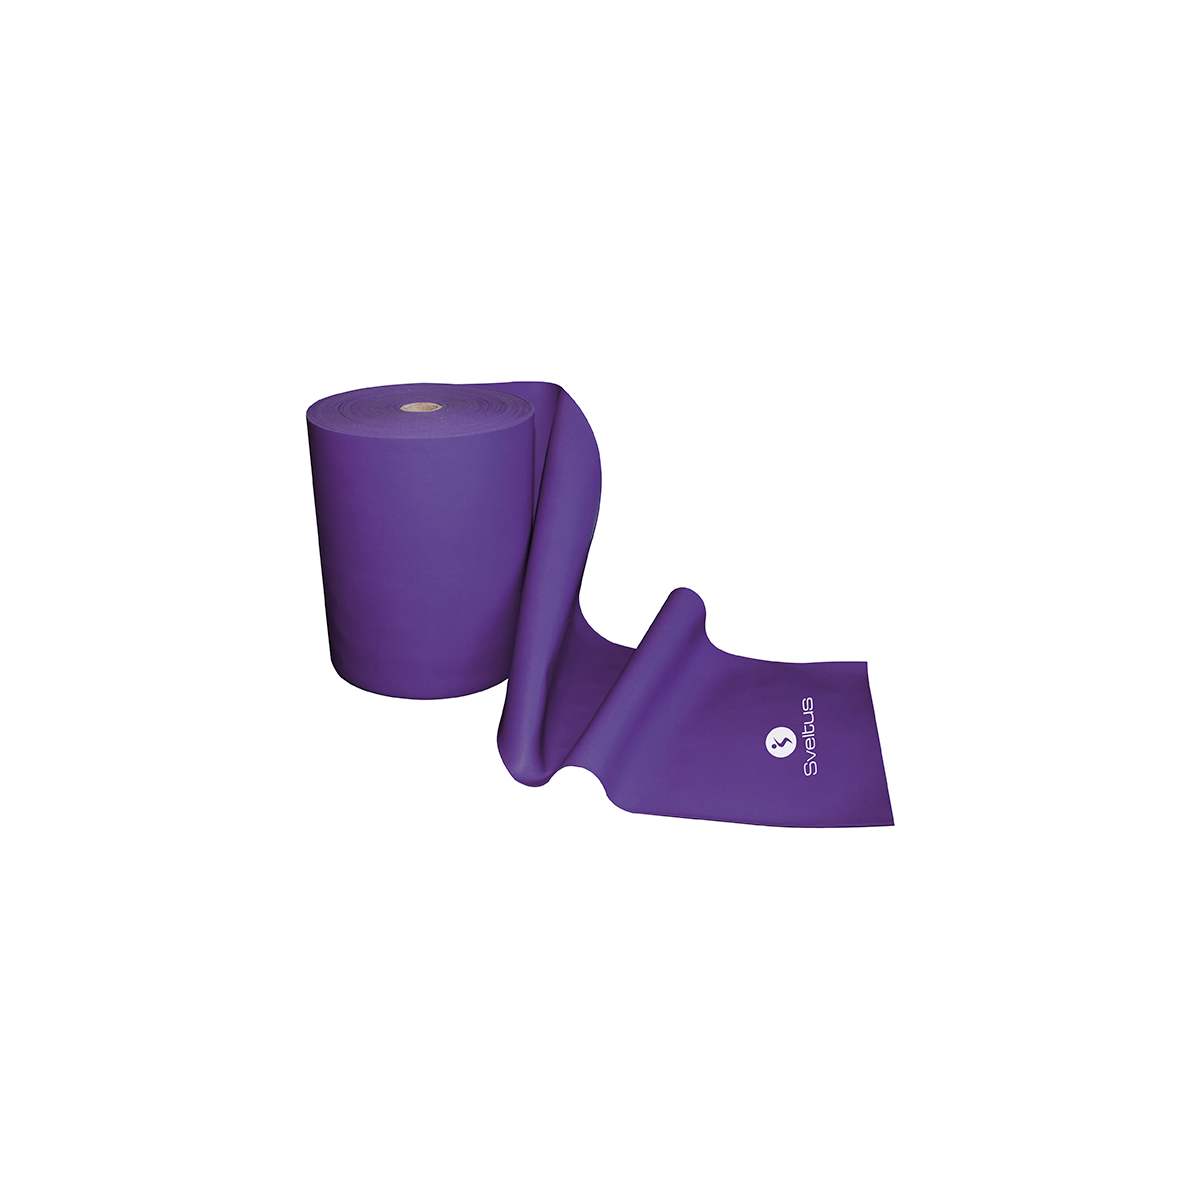 Fit Band Roll 24 meters - Strong - Lilac - Gladform Active Gear